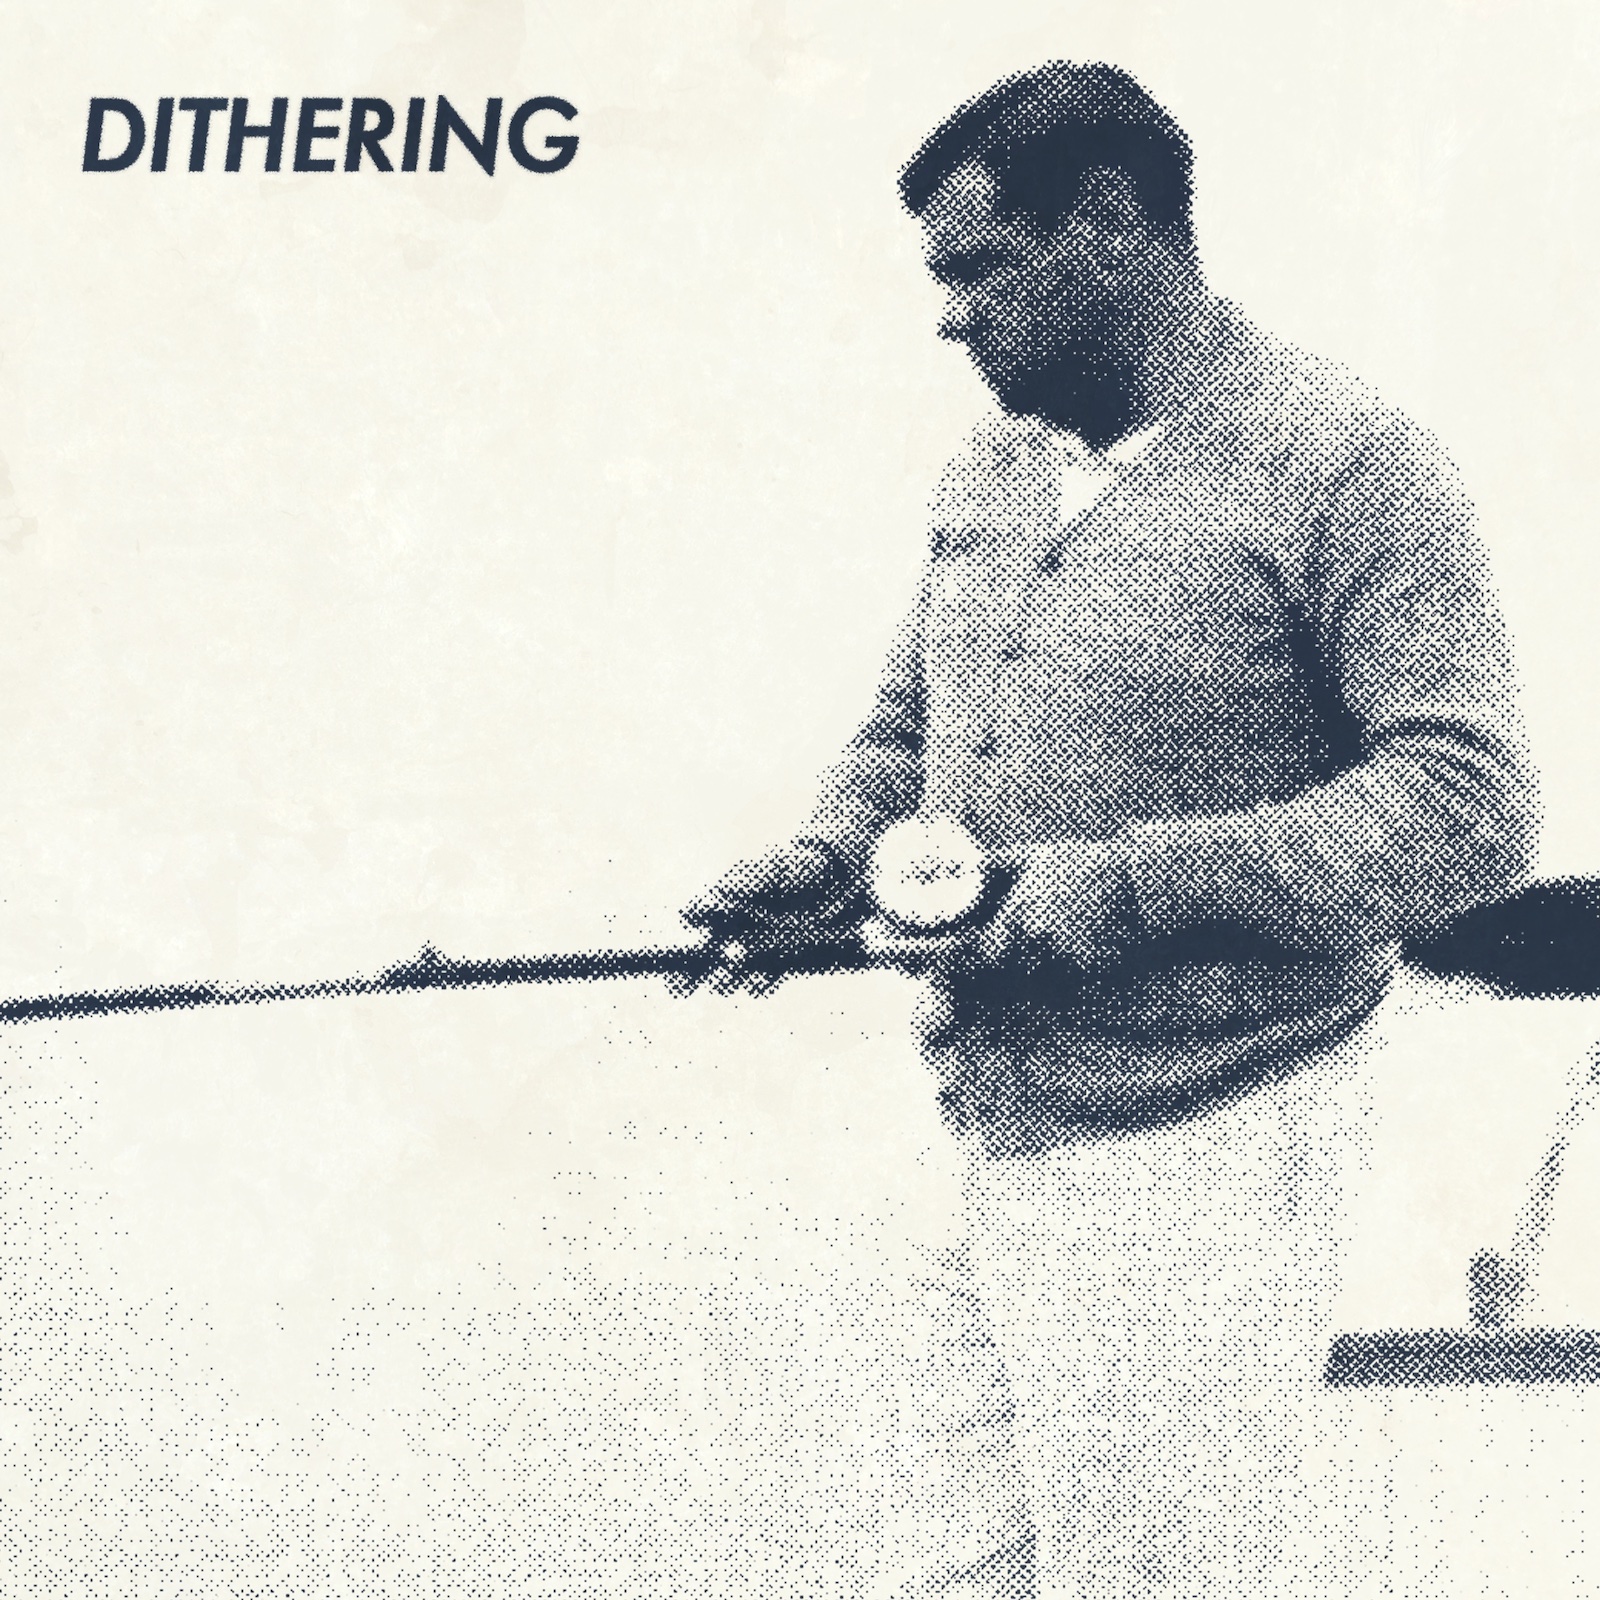 August 2021 cover art for Dithering, depicting Yankees legend Babe Ruth fishing.